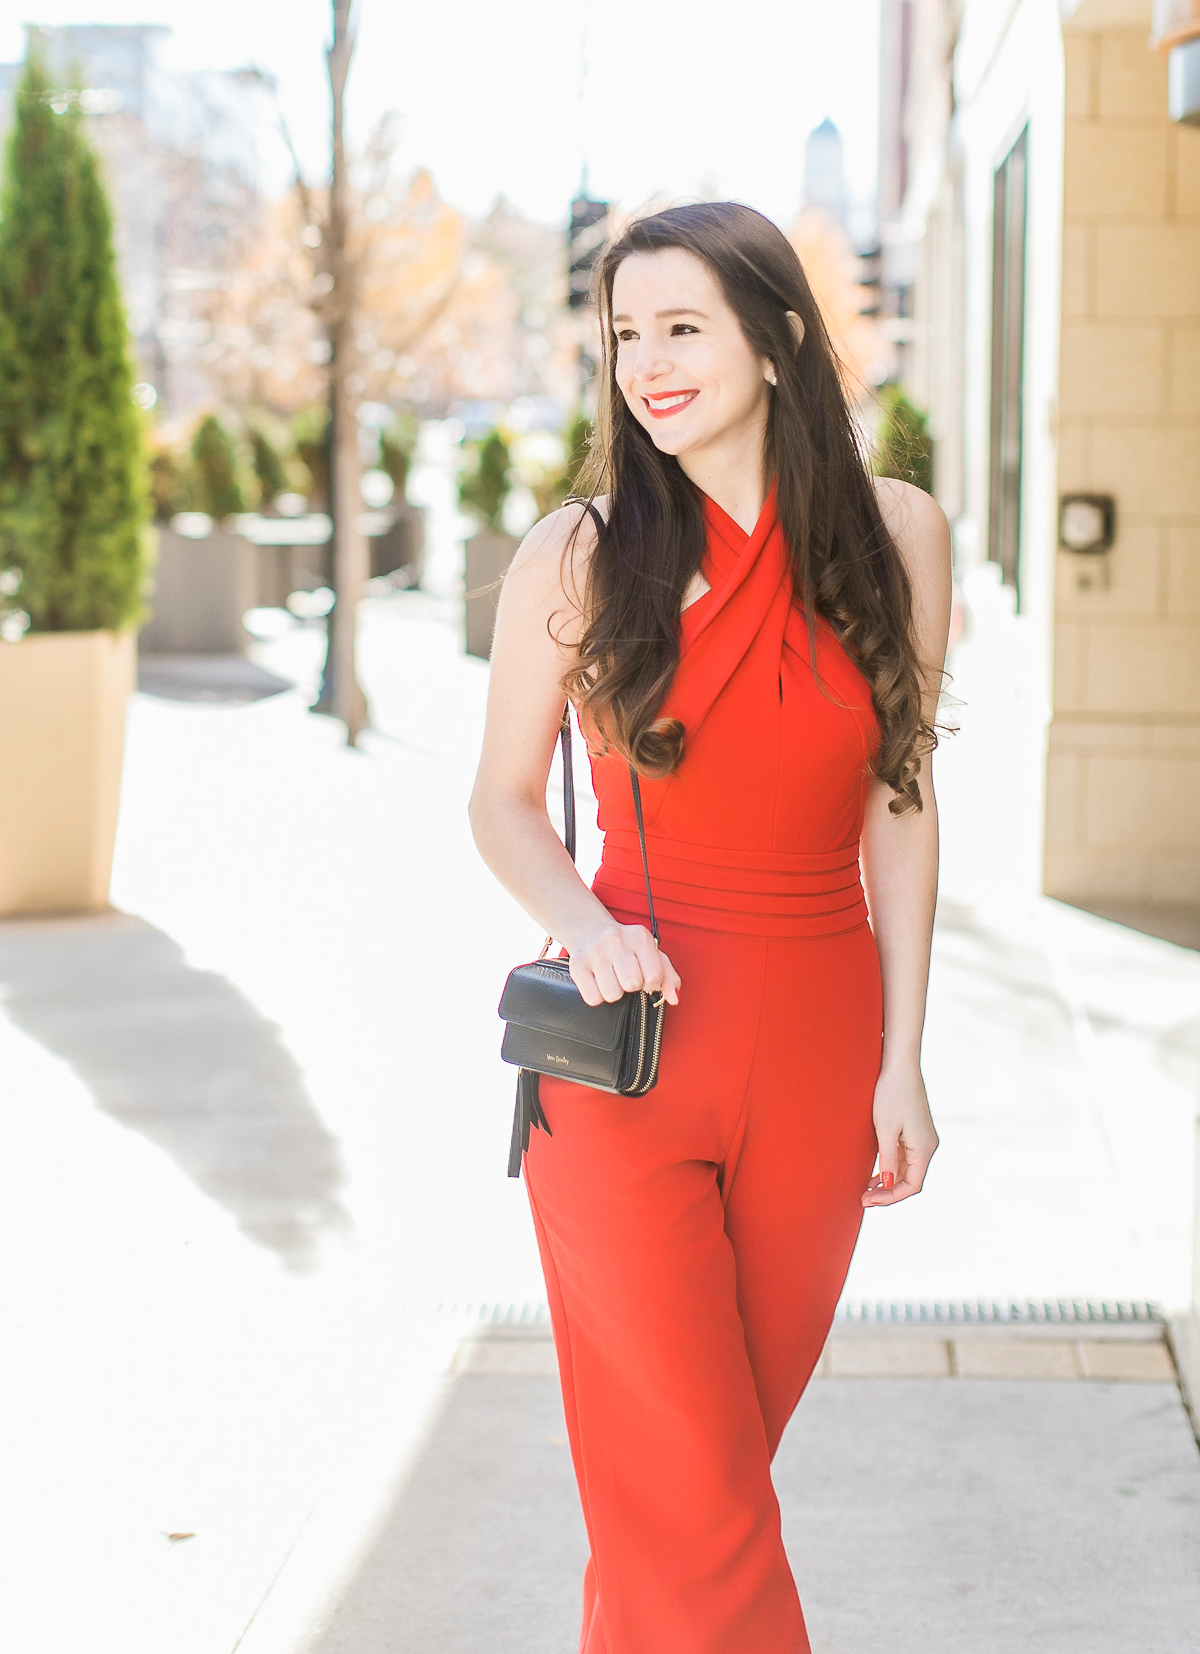 Blogger Stephanie Ziajka shares one of her favorite Christmas party outfits on Diary of a Debutante